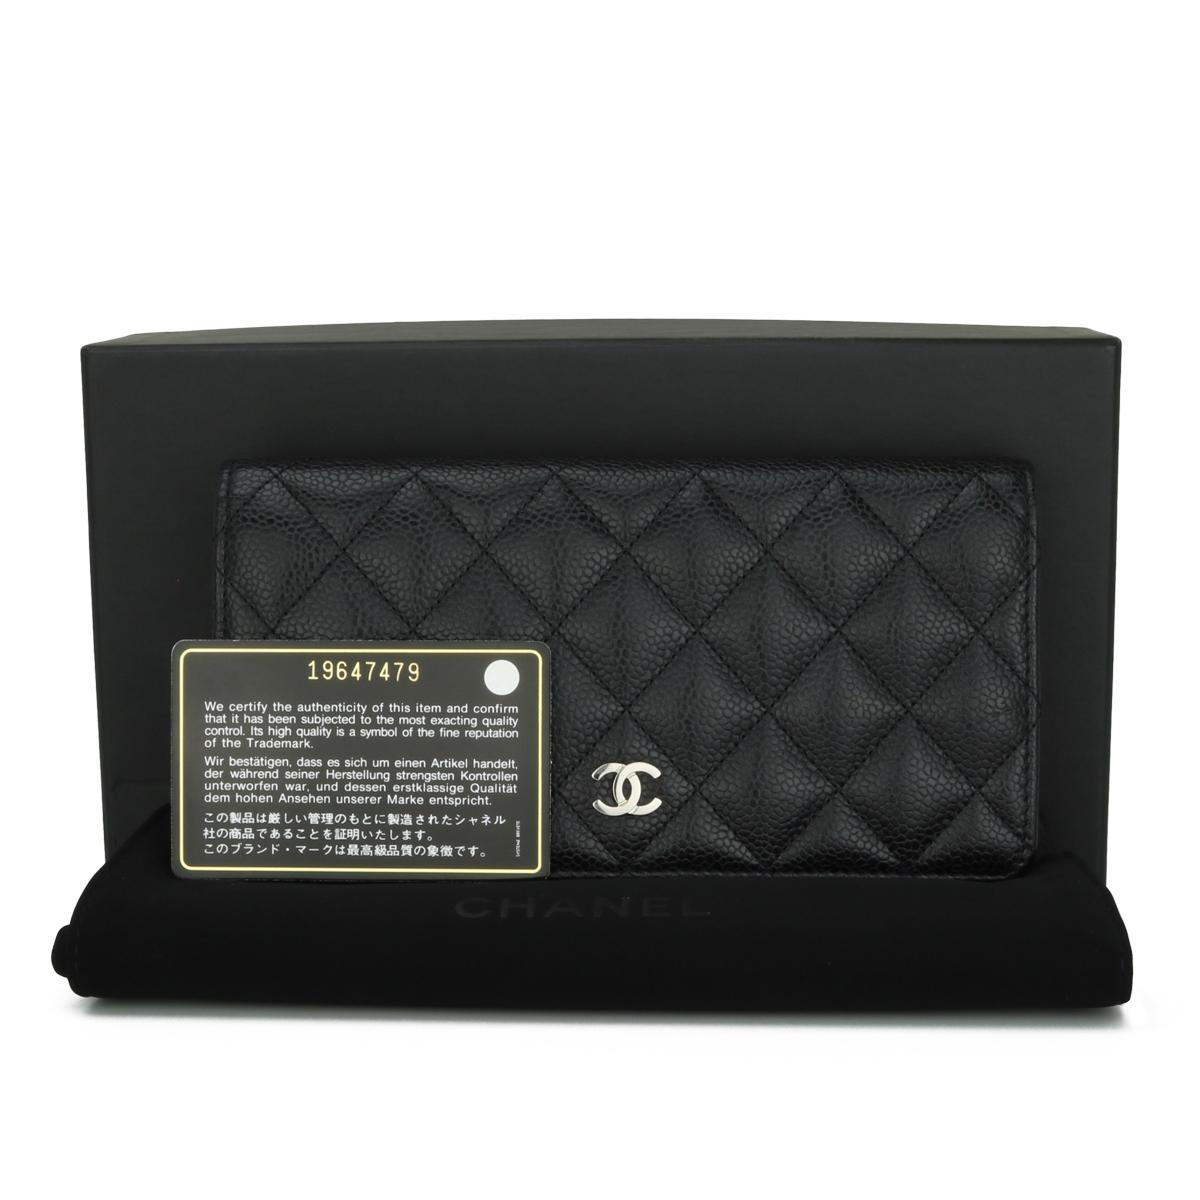 Chanel Quilted Classic Long Flap Yen Wallet in Black Caviar with Silver Hardware 2014.

This stunning wallet is in very good condition, the wallet still holds its original shape, and the hardware is still very shiny.

- Exterior Condition: Very good